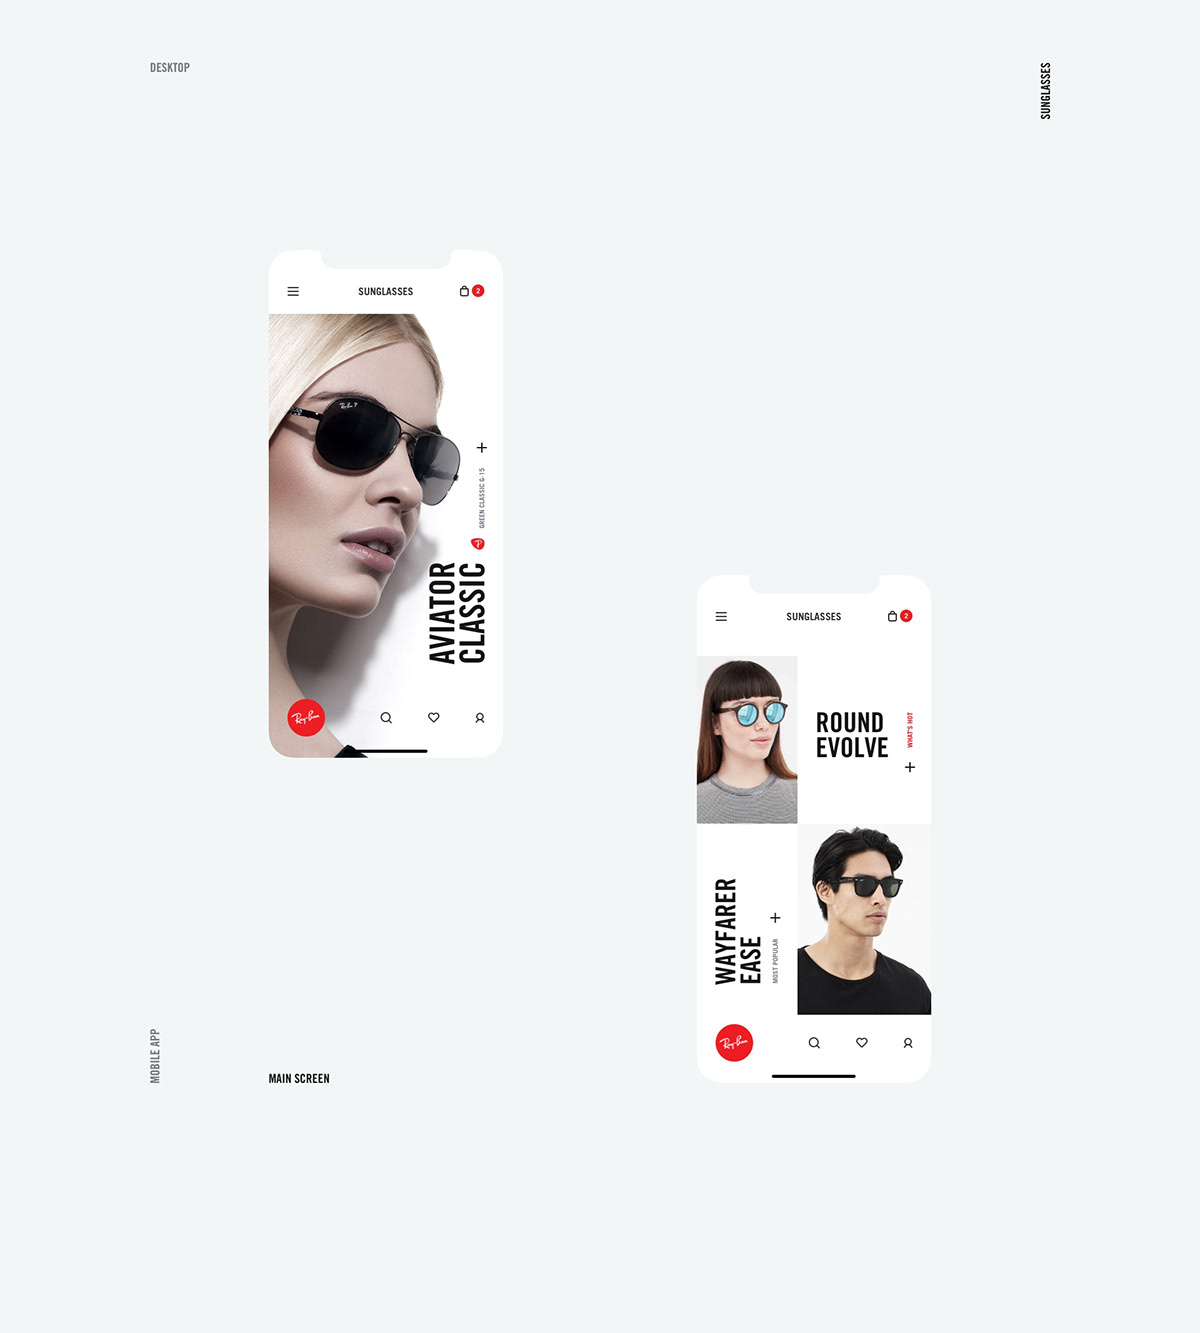 Ray-Ban online shop concept on Behance